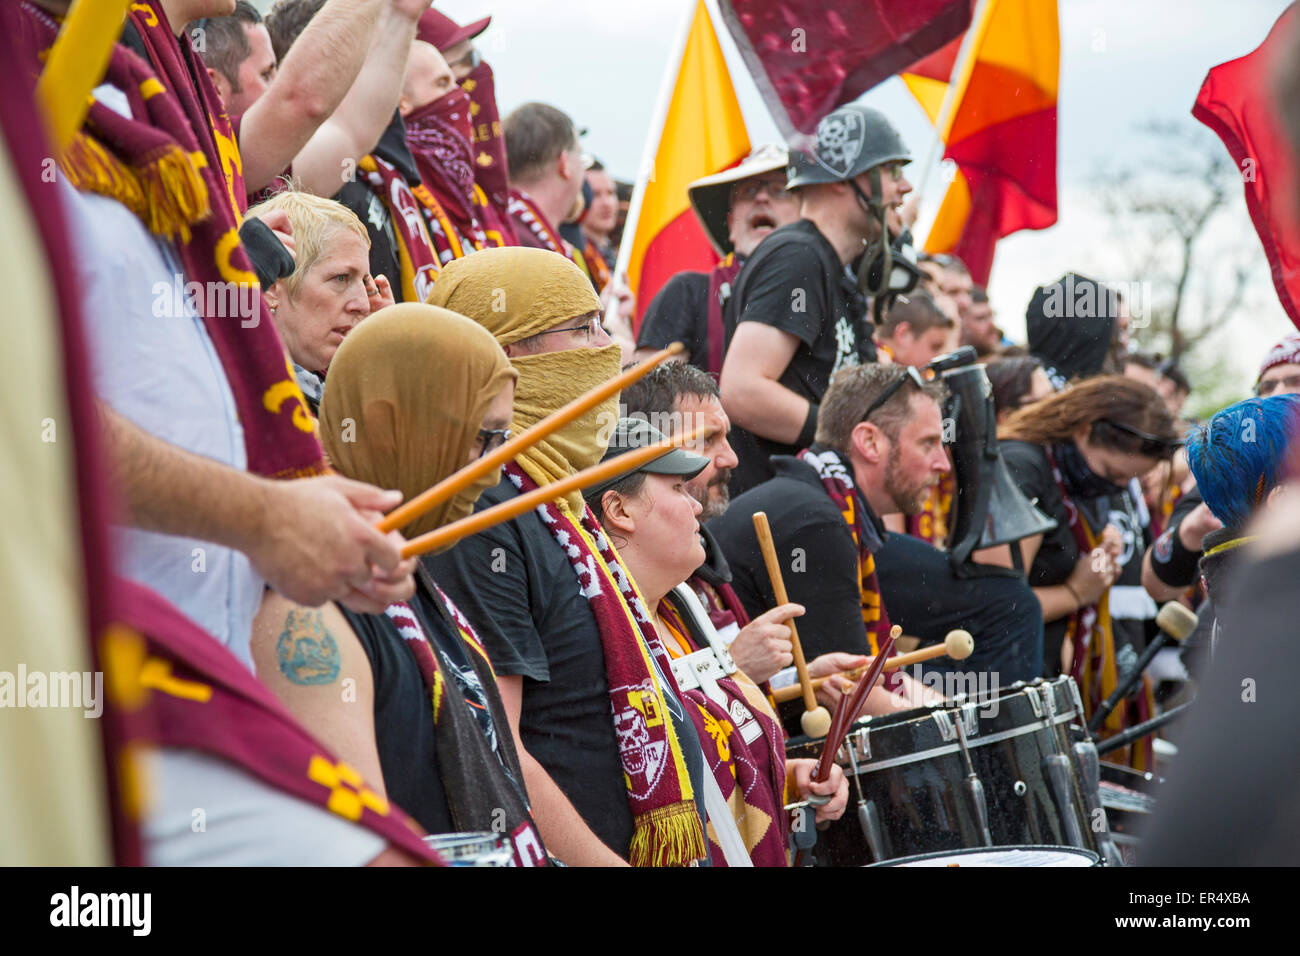 Detroit, Michigan - Soccer fans cheer their team, Detroit City FC, in a match against Muskegon Risers. Stock Photo